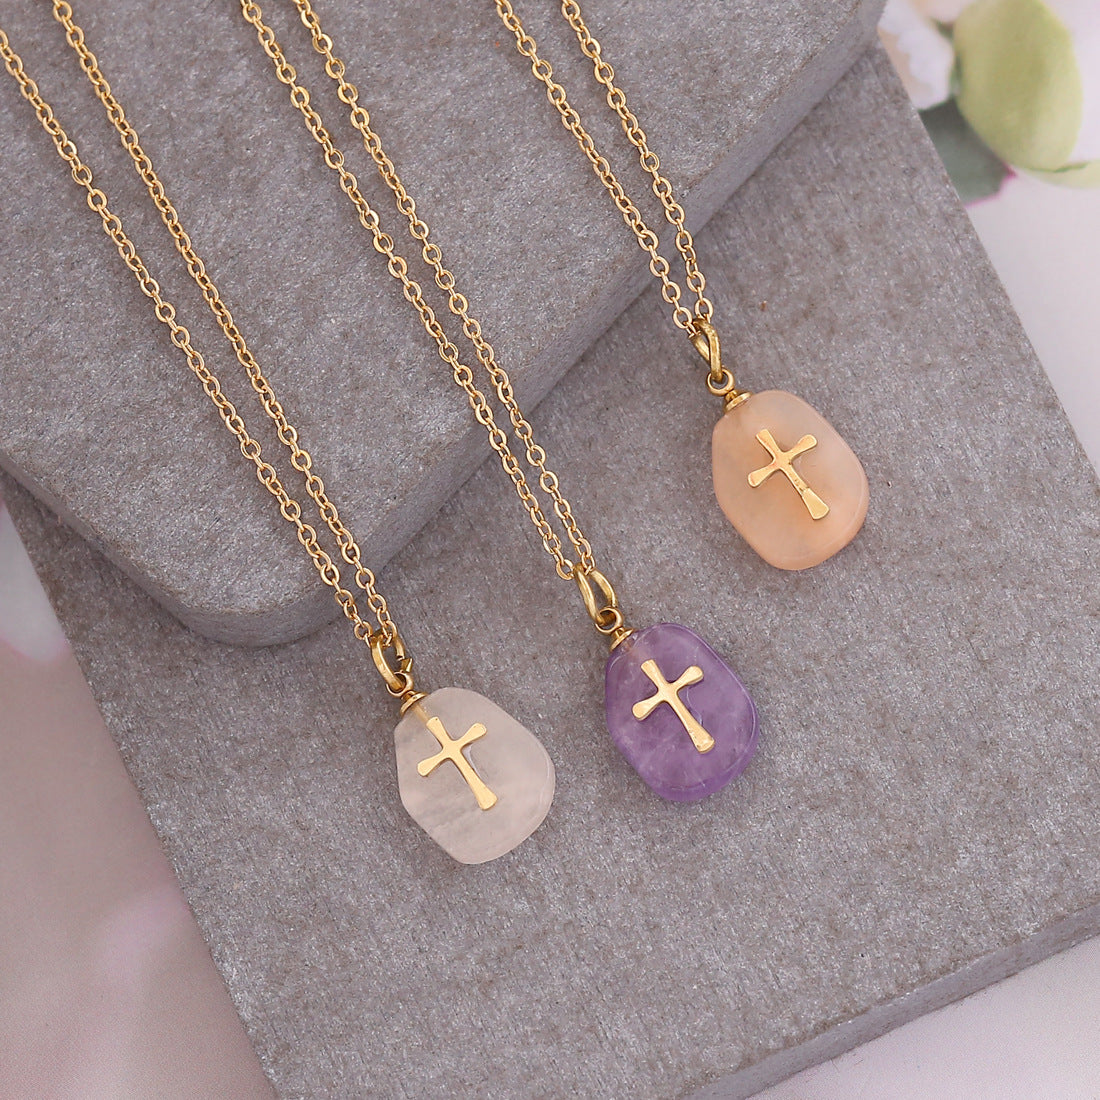 Women's Metal Natural Stone Cross Necklace